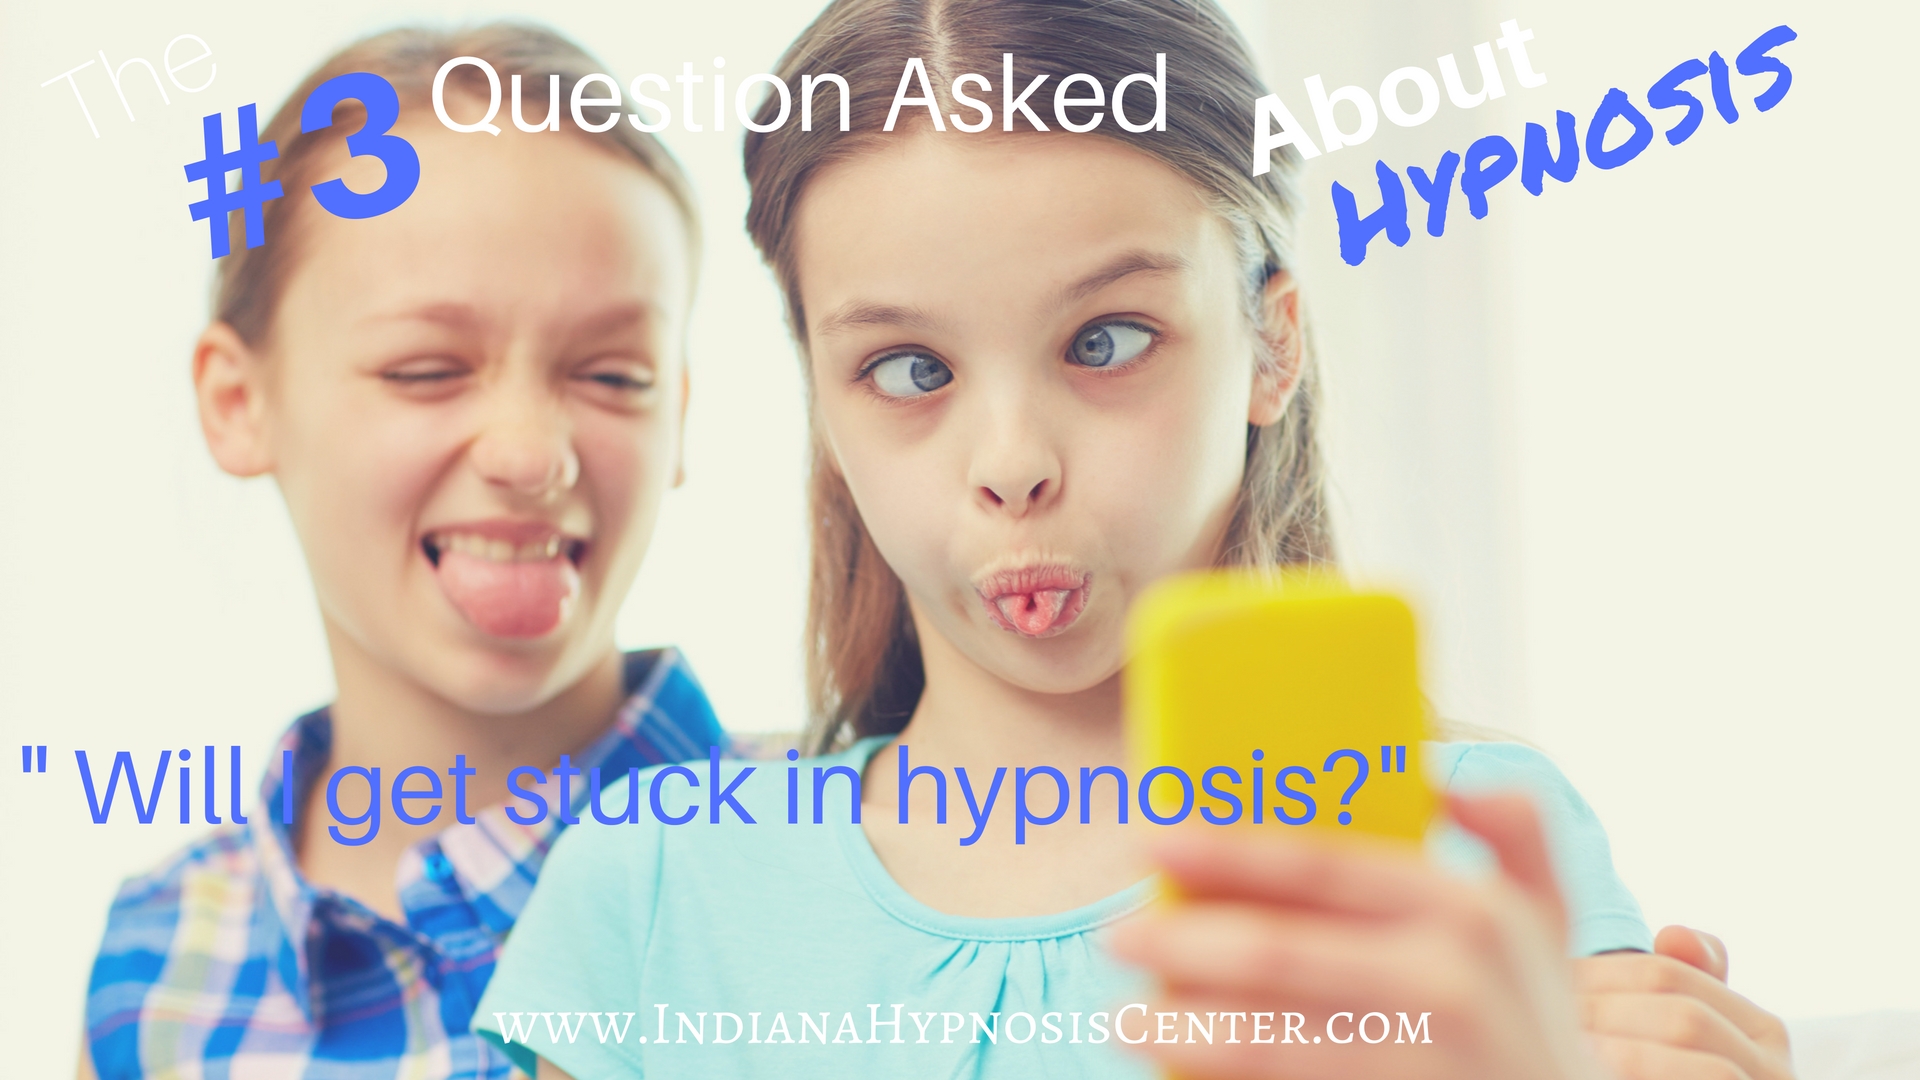 The #3 Question Asked About Hypnosis